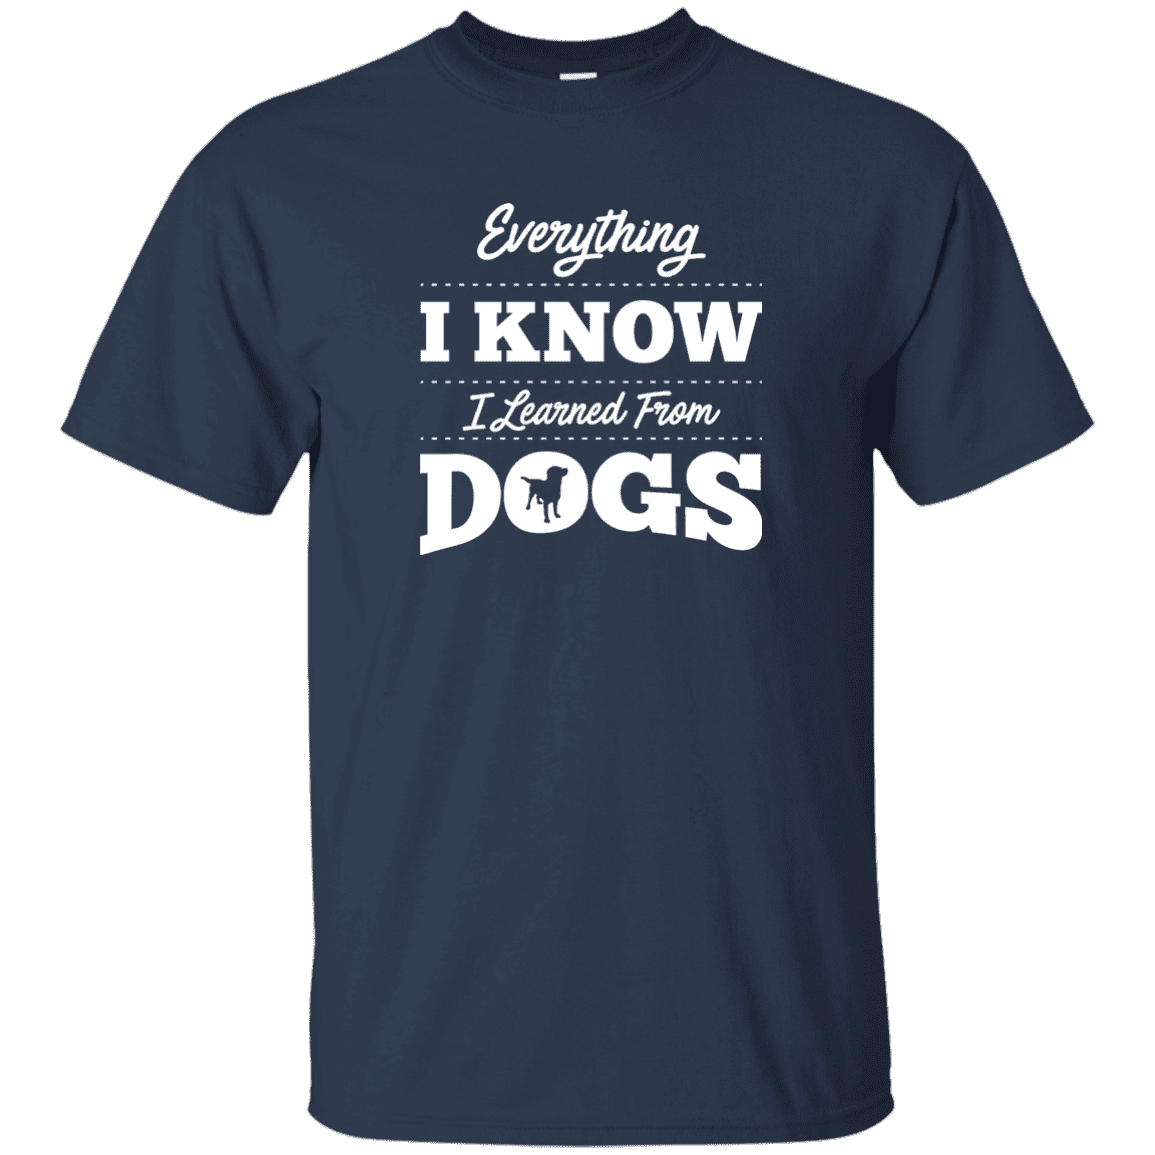 Everything I Know - T Shirt.